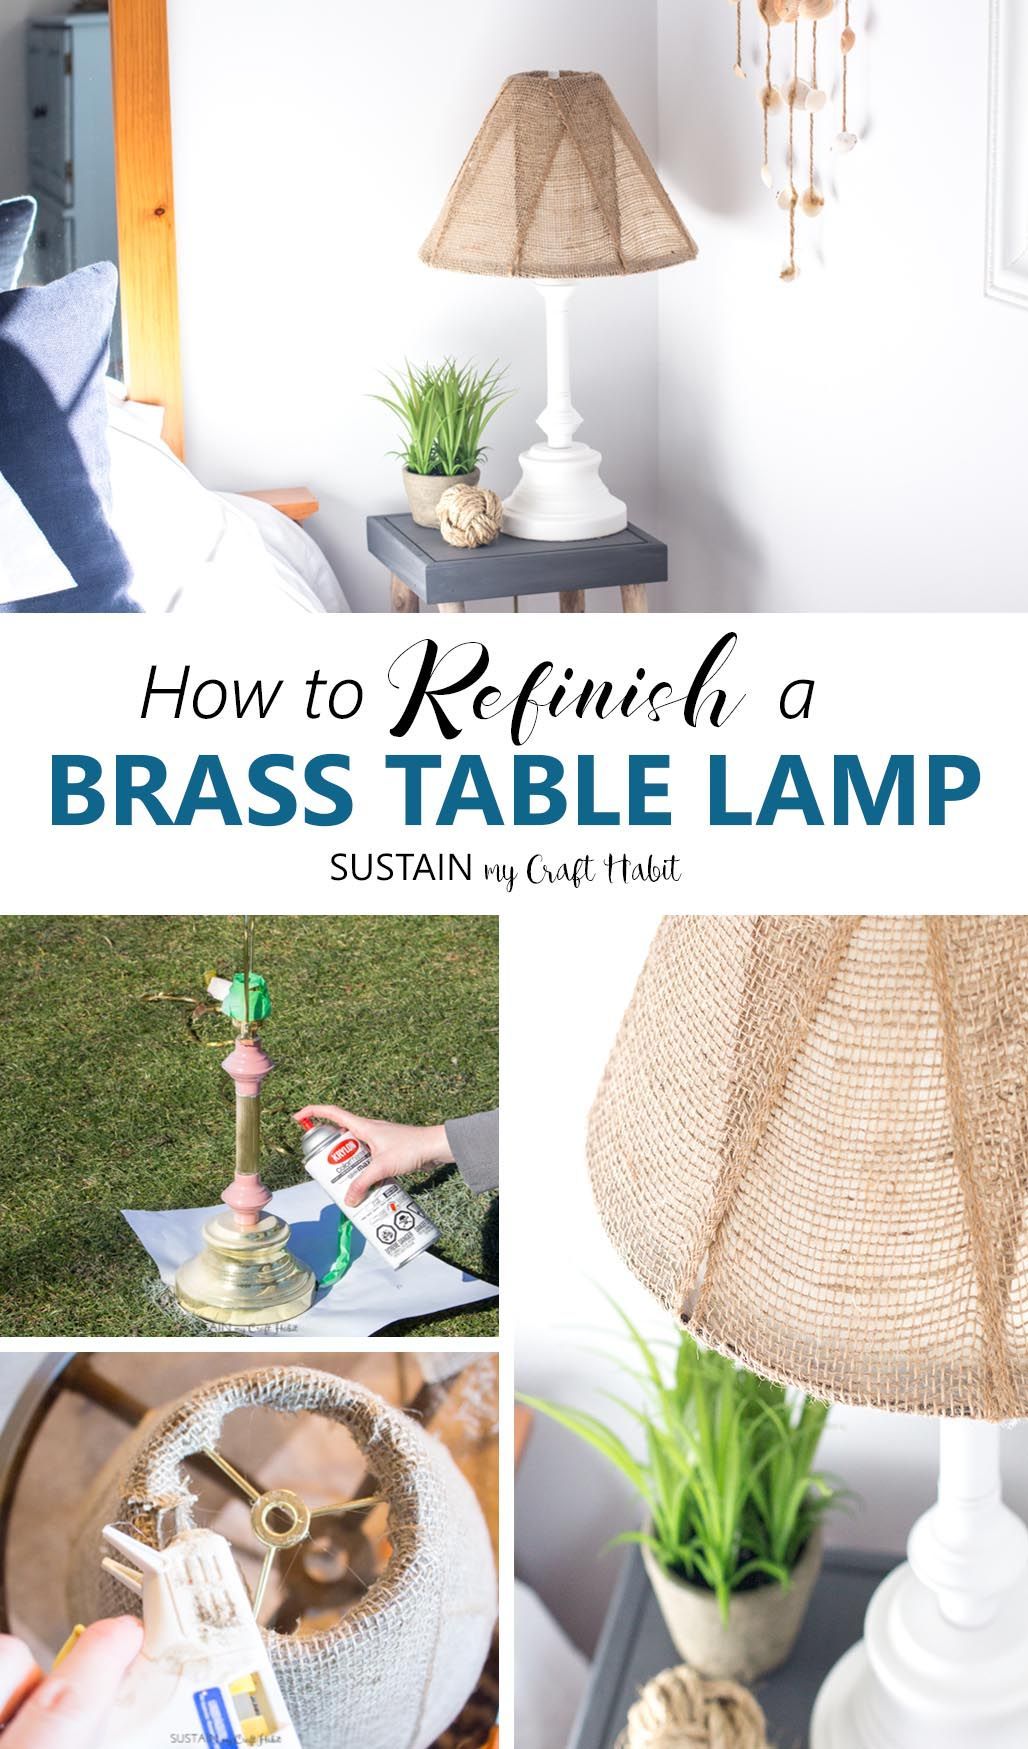 A DIY Brass Lamp Makeover with a Burlap Lampshade - A DIY Brass Lamp Makeover with a Burlap Lampshade -   19 diy Lamp makeover ideas